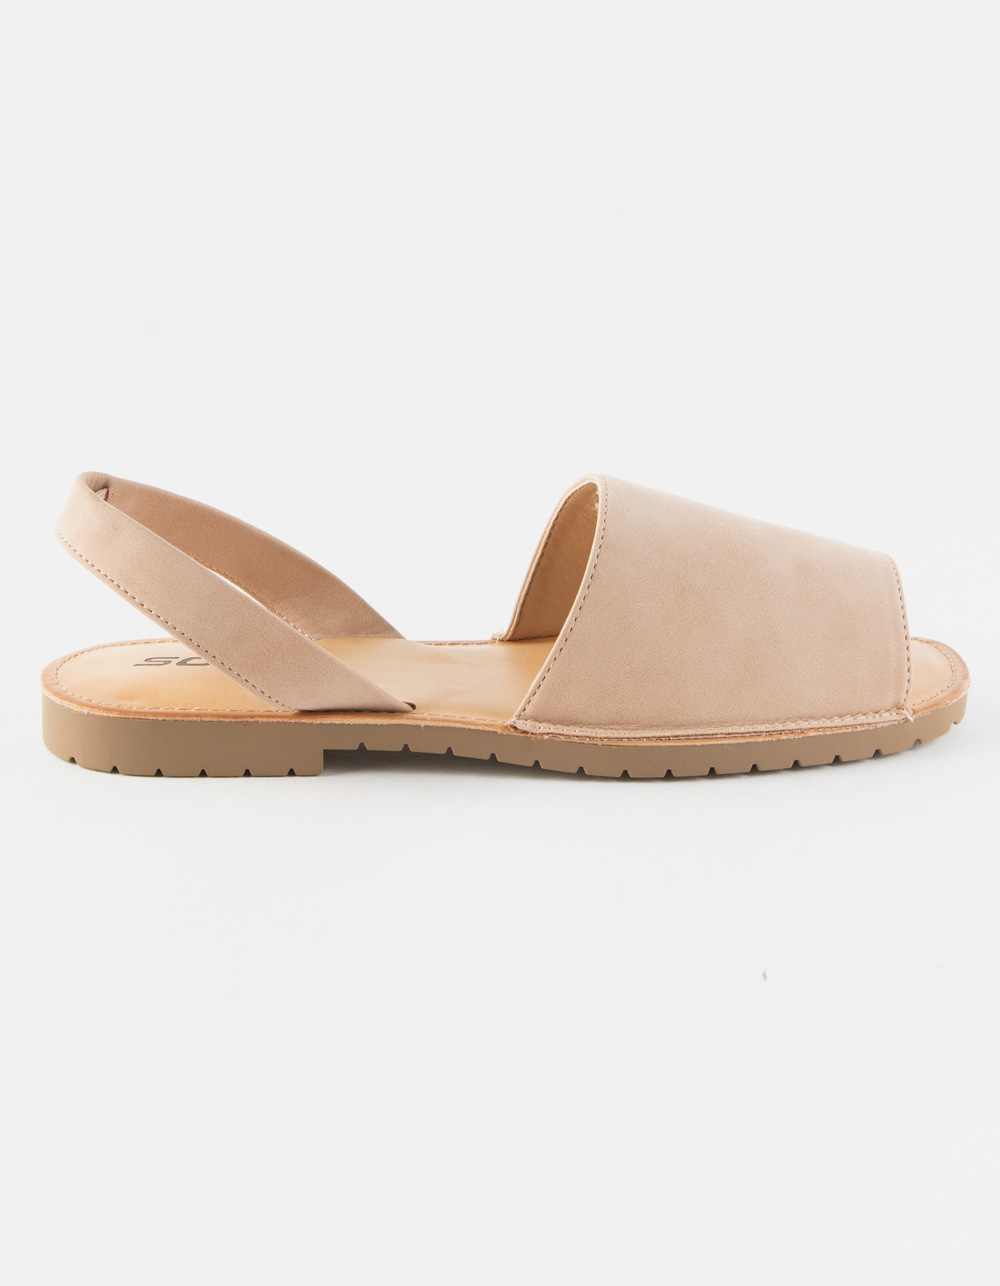 SODA Vinery Womens Sandals - NUDE | Tillys